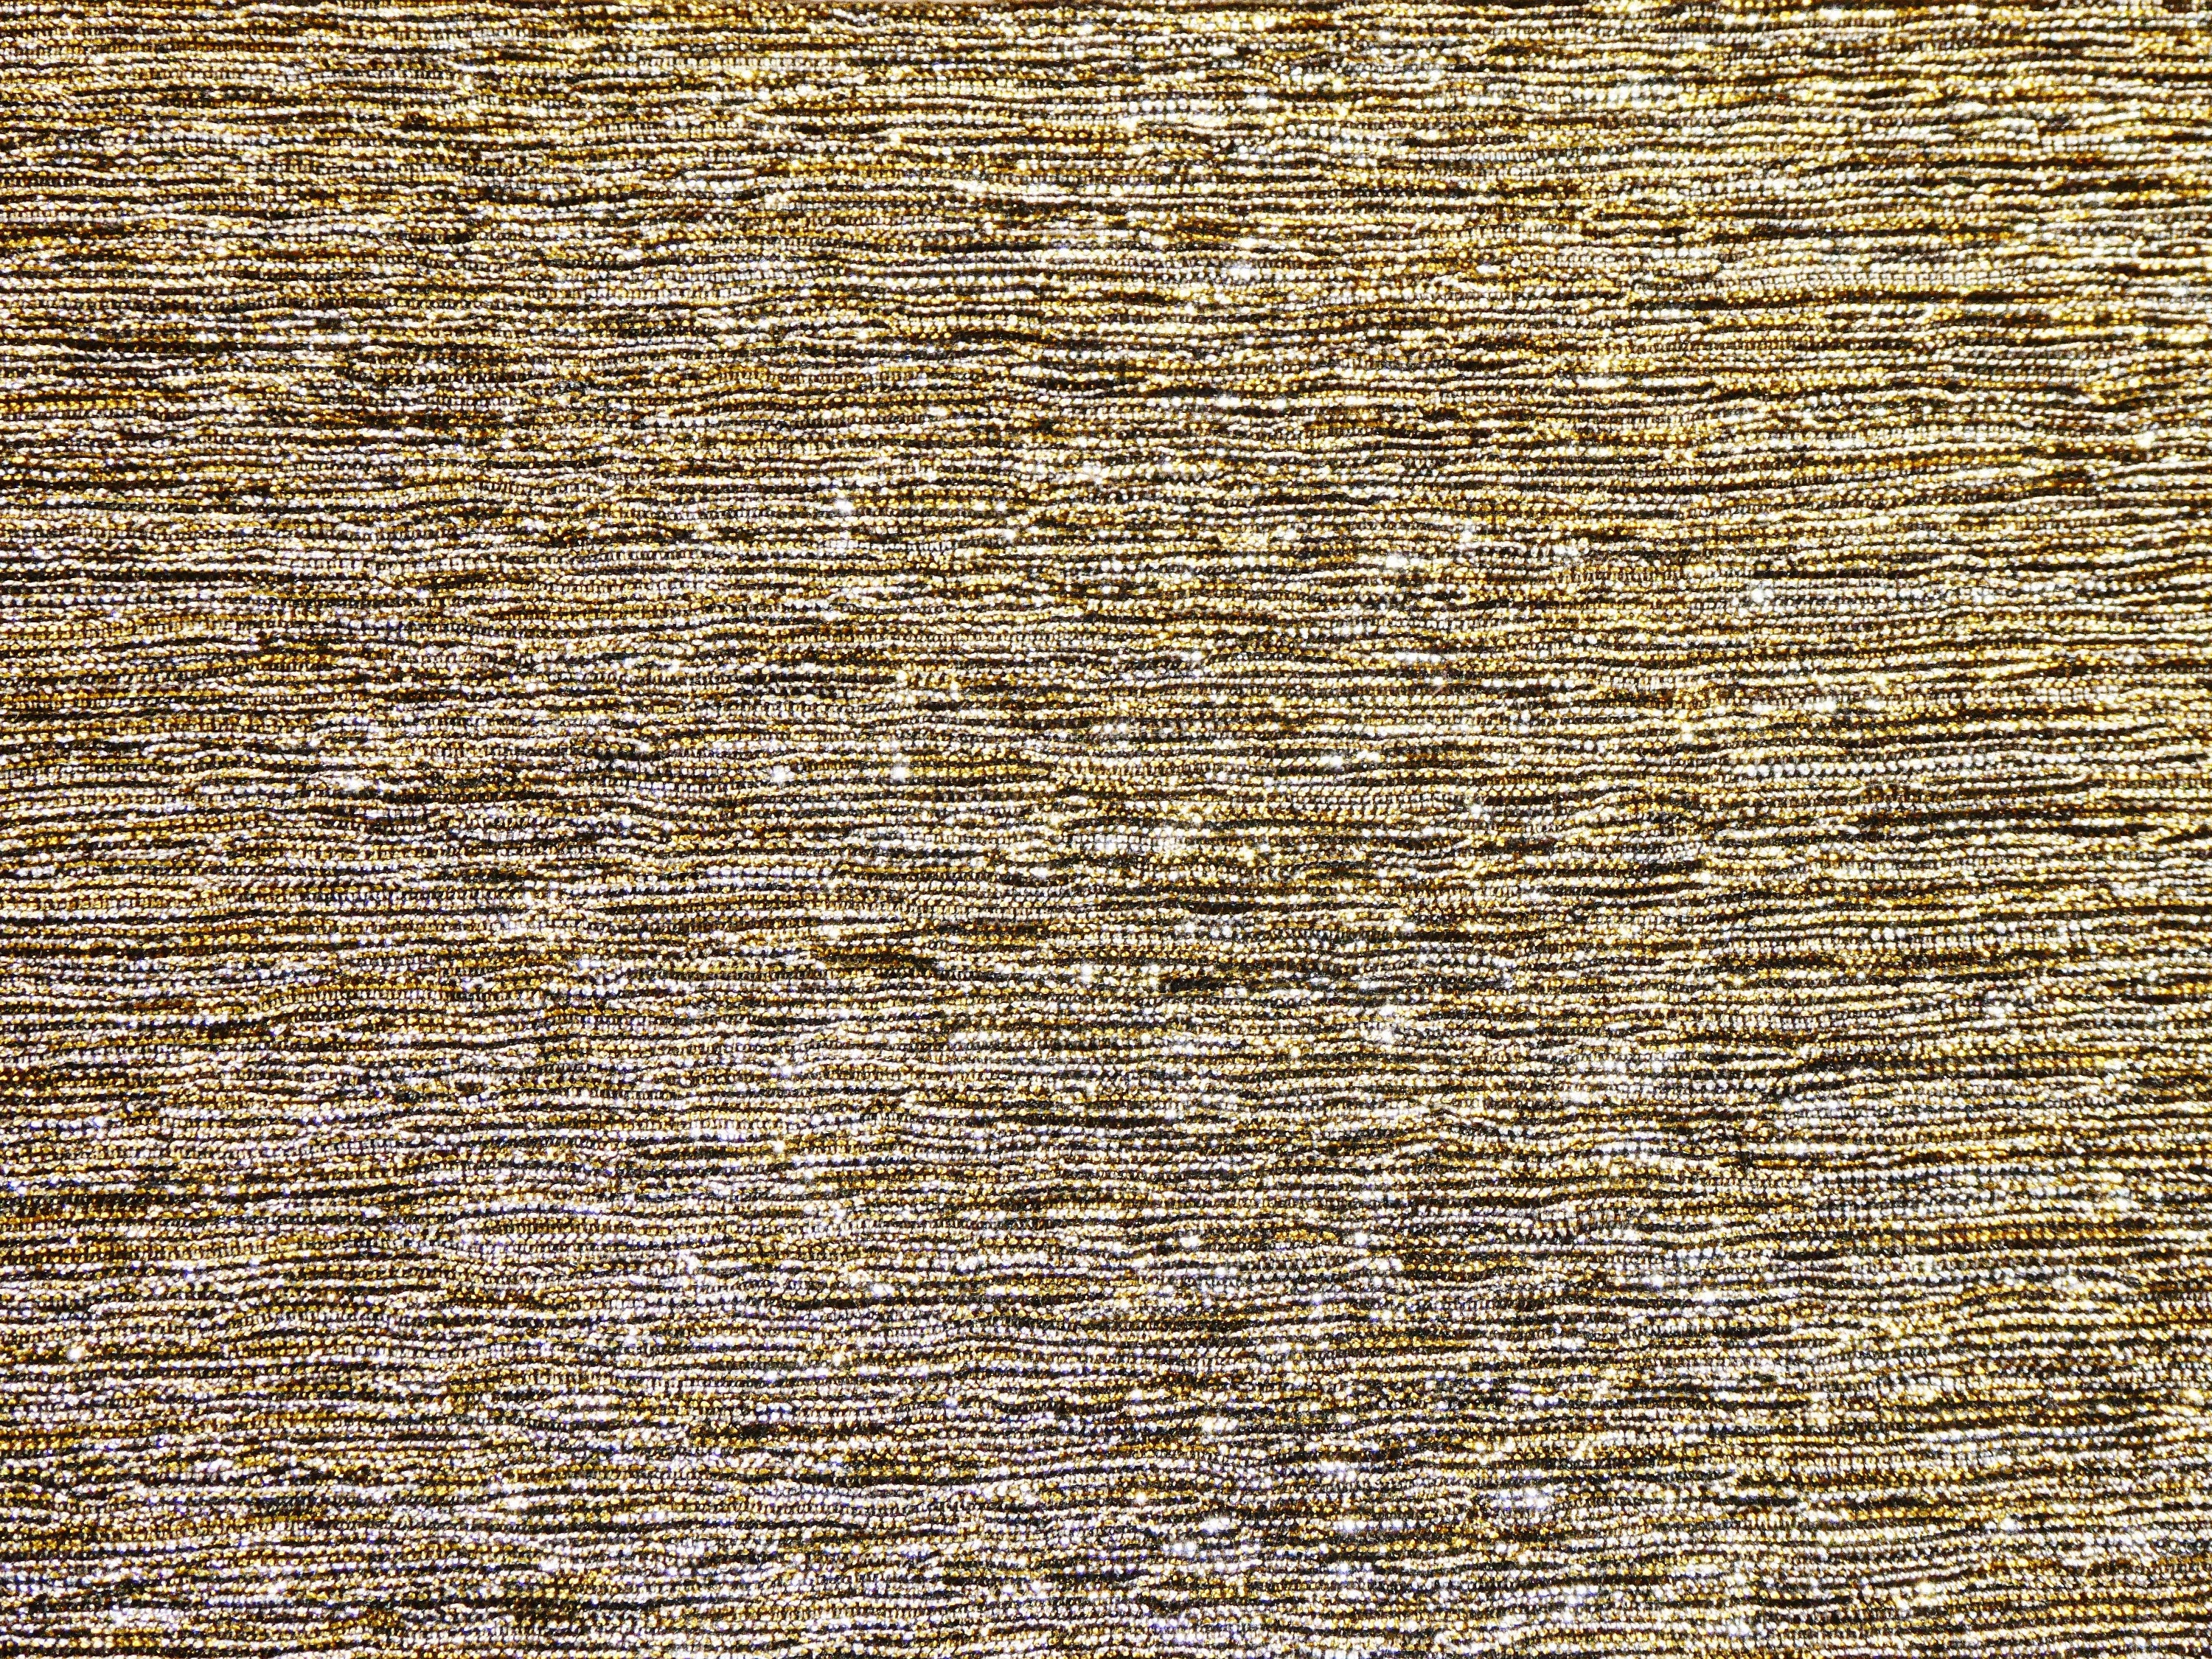 12x12 Silver Gold Blended Glitter Metallic Fabric Applied To Leather Cowhide For Firmness 3.5-4Oz/1.4-1.6mm Peggysuealso E4350-02"